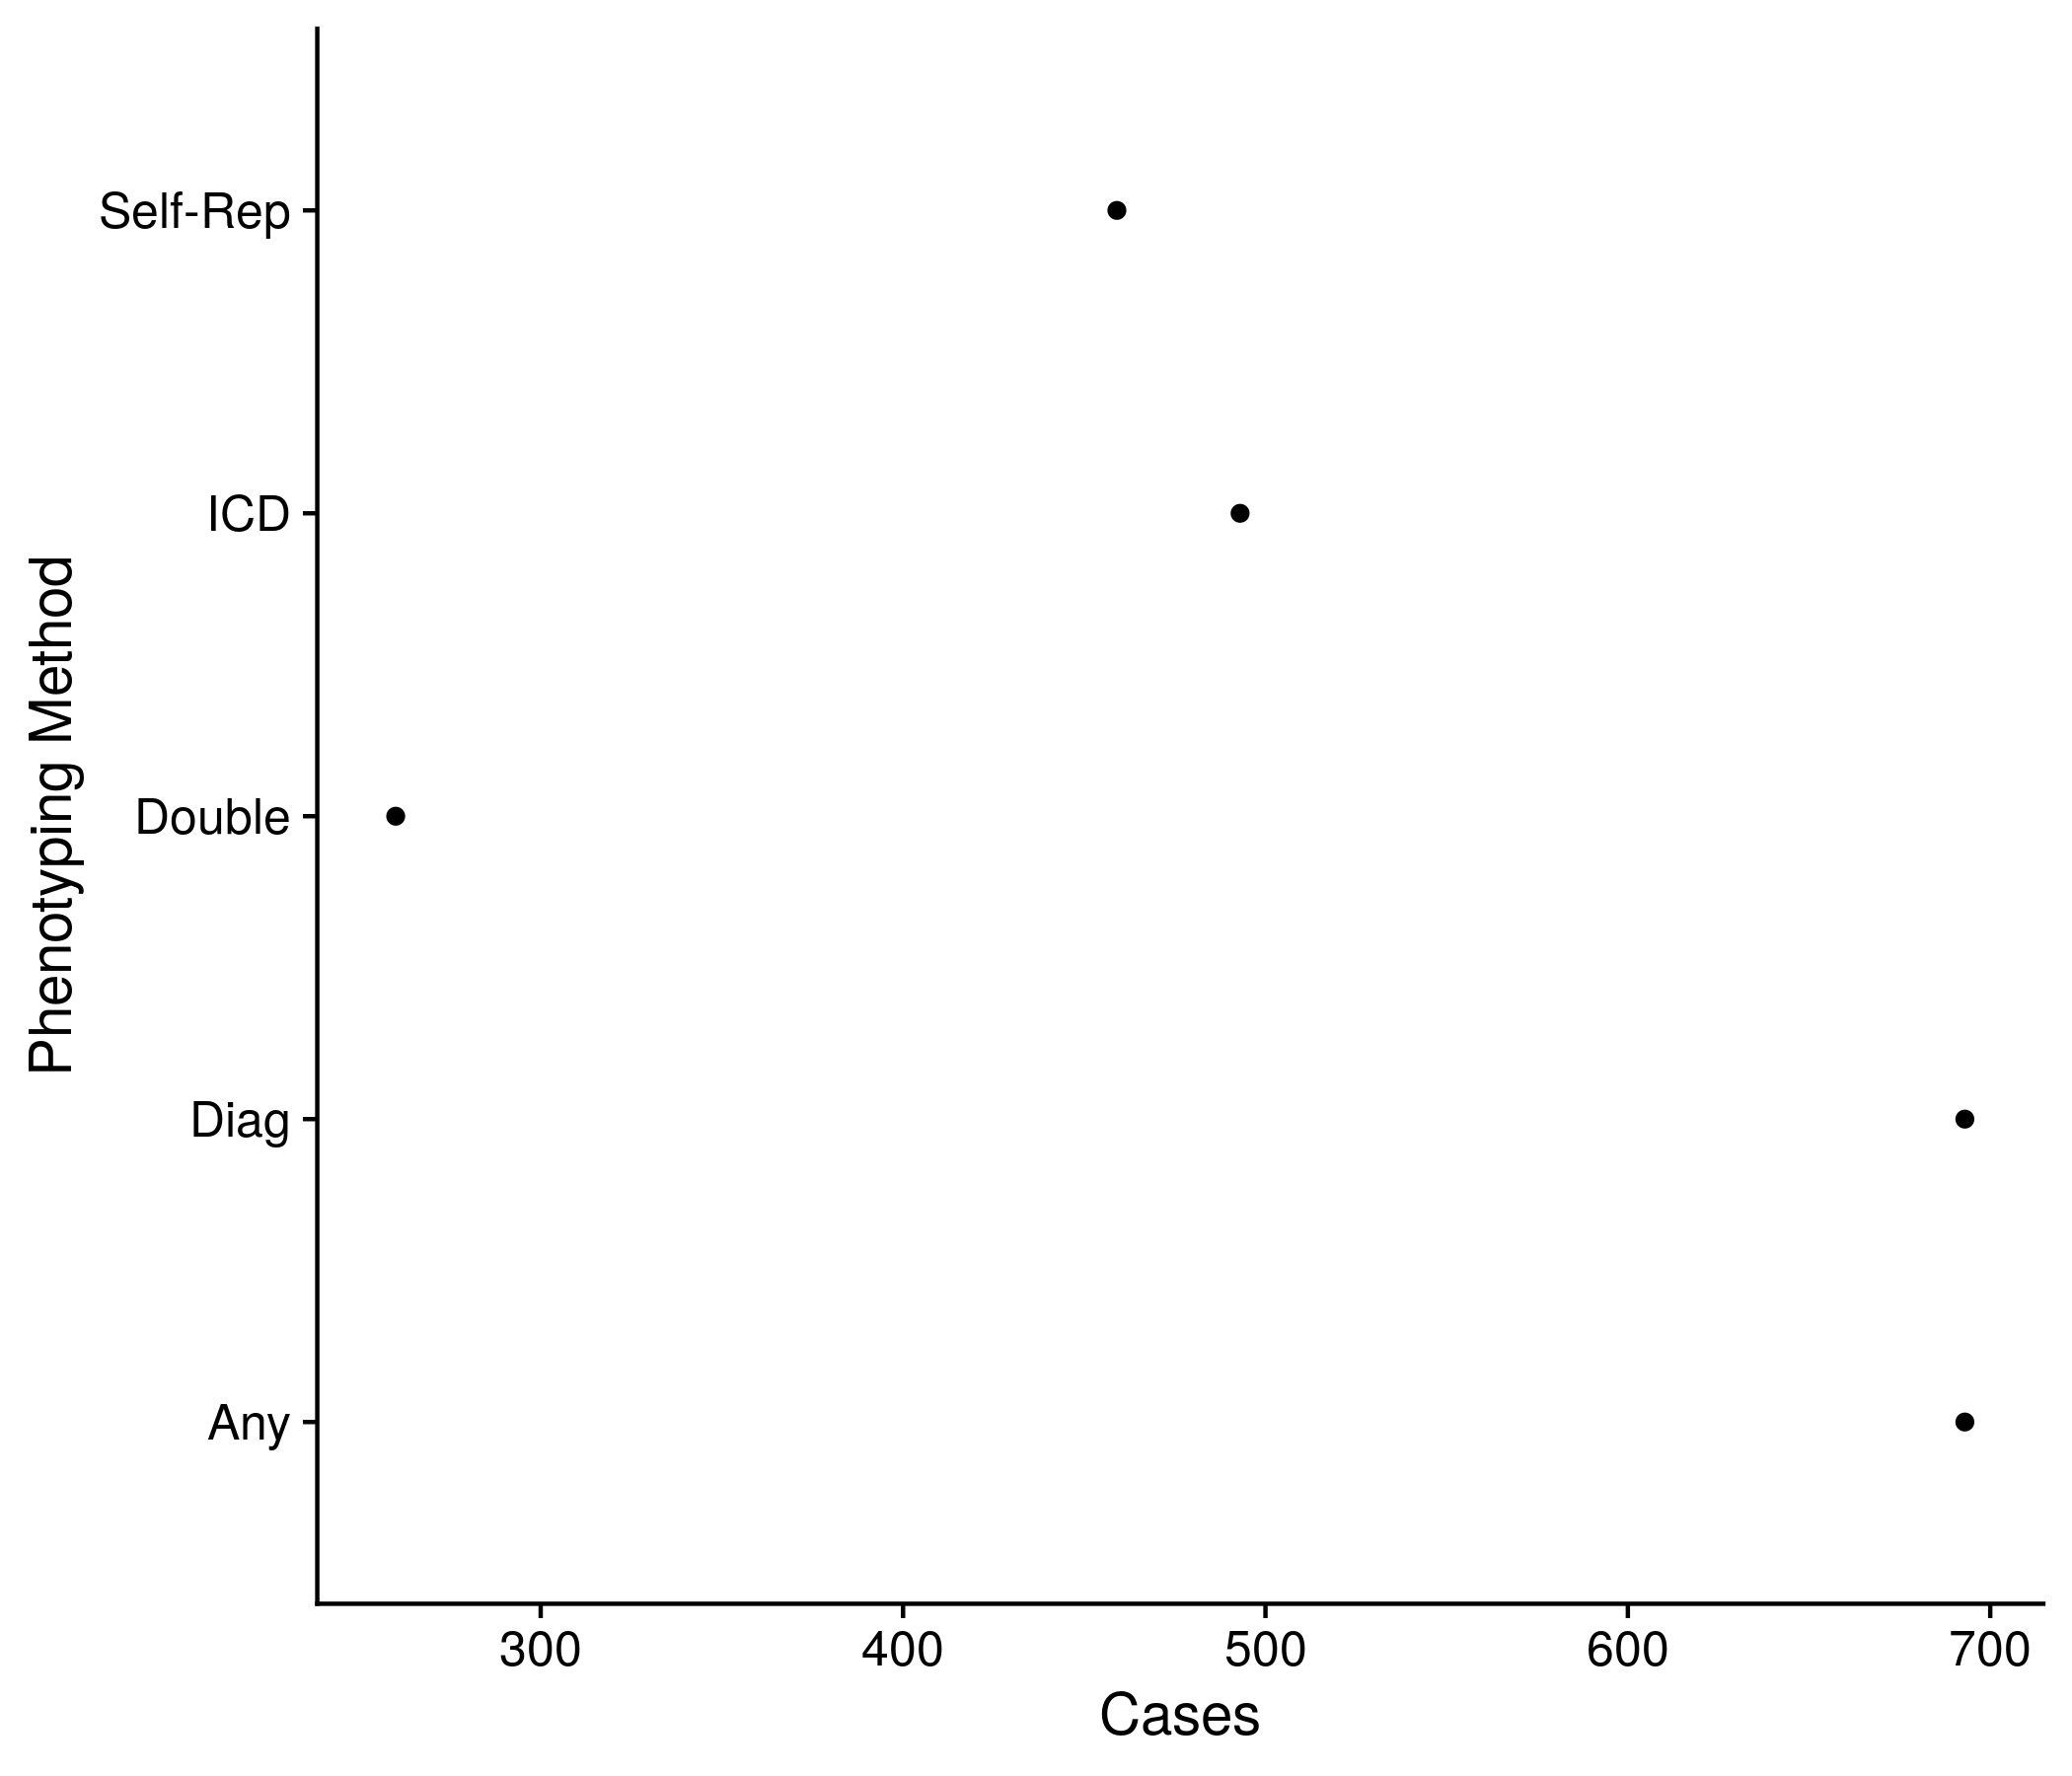 Example plot showing the number of cases by each method